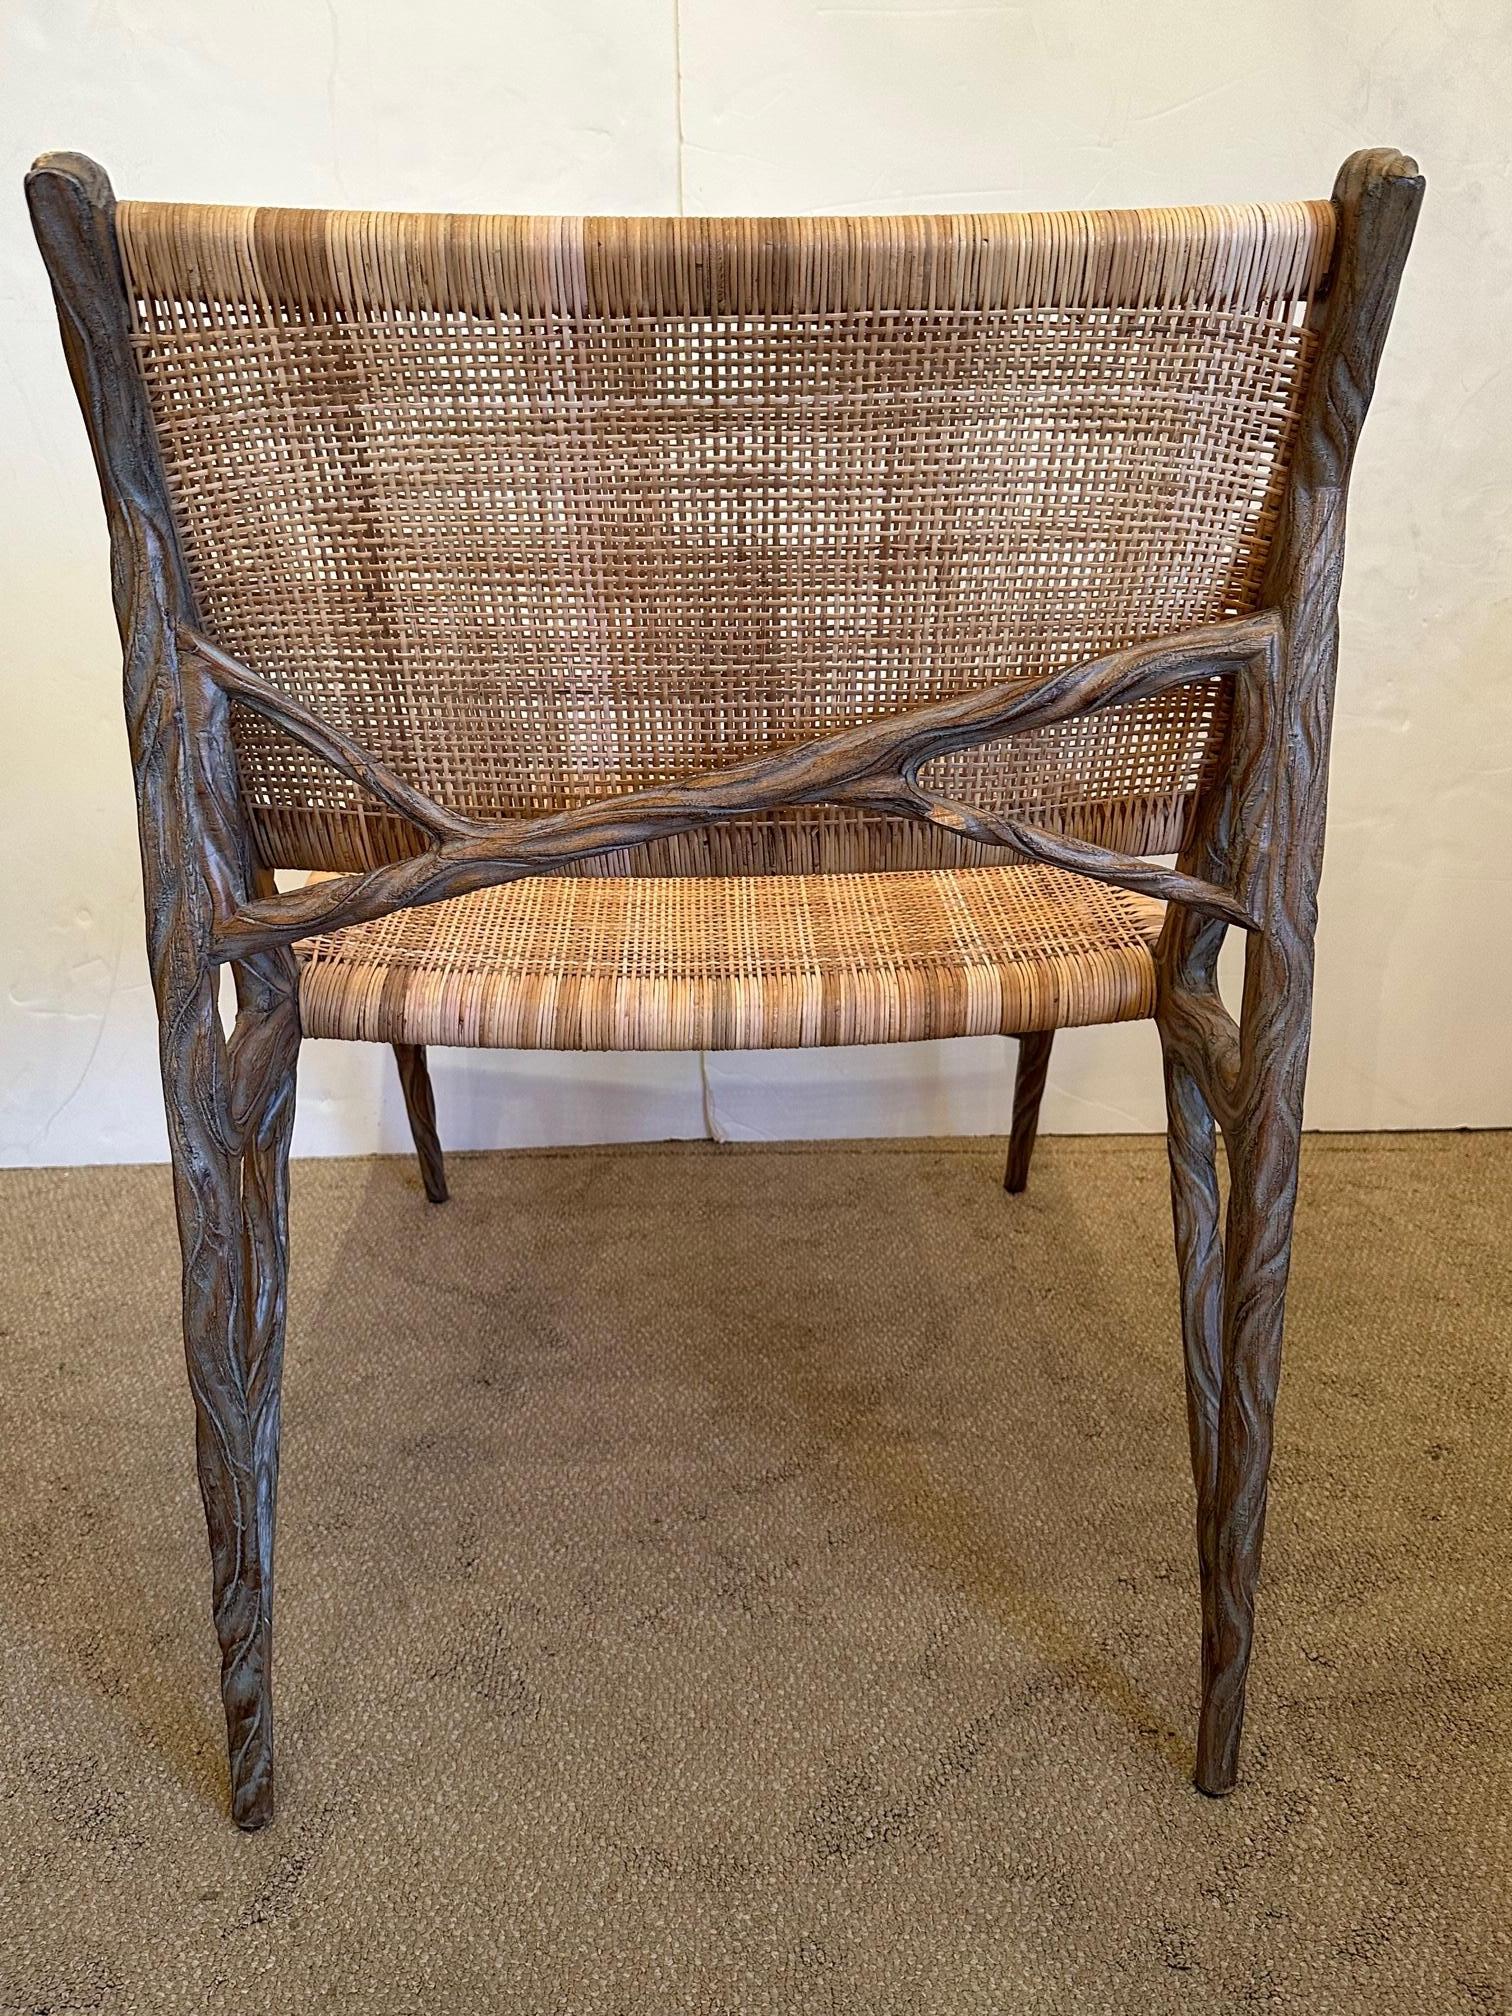 American Superb Organic Modern Faux Twig and Woven Rattan Chair